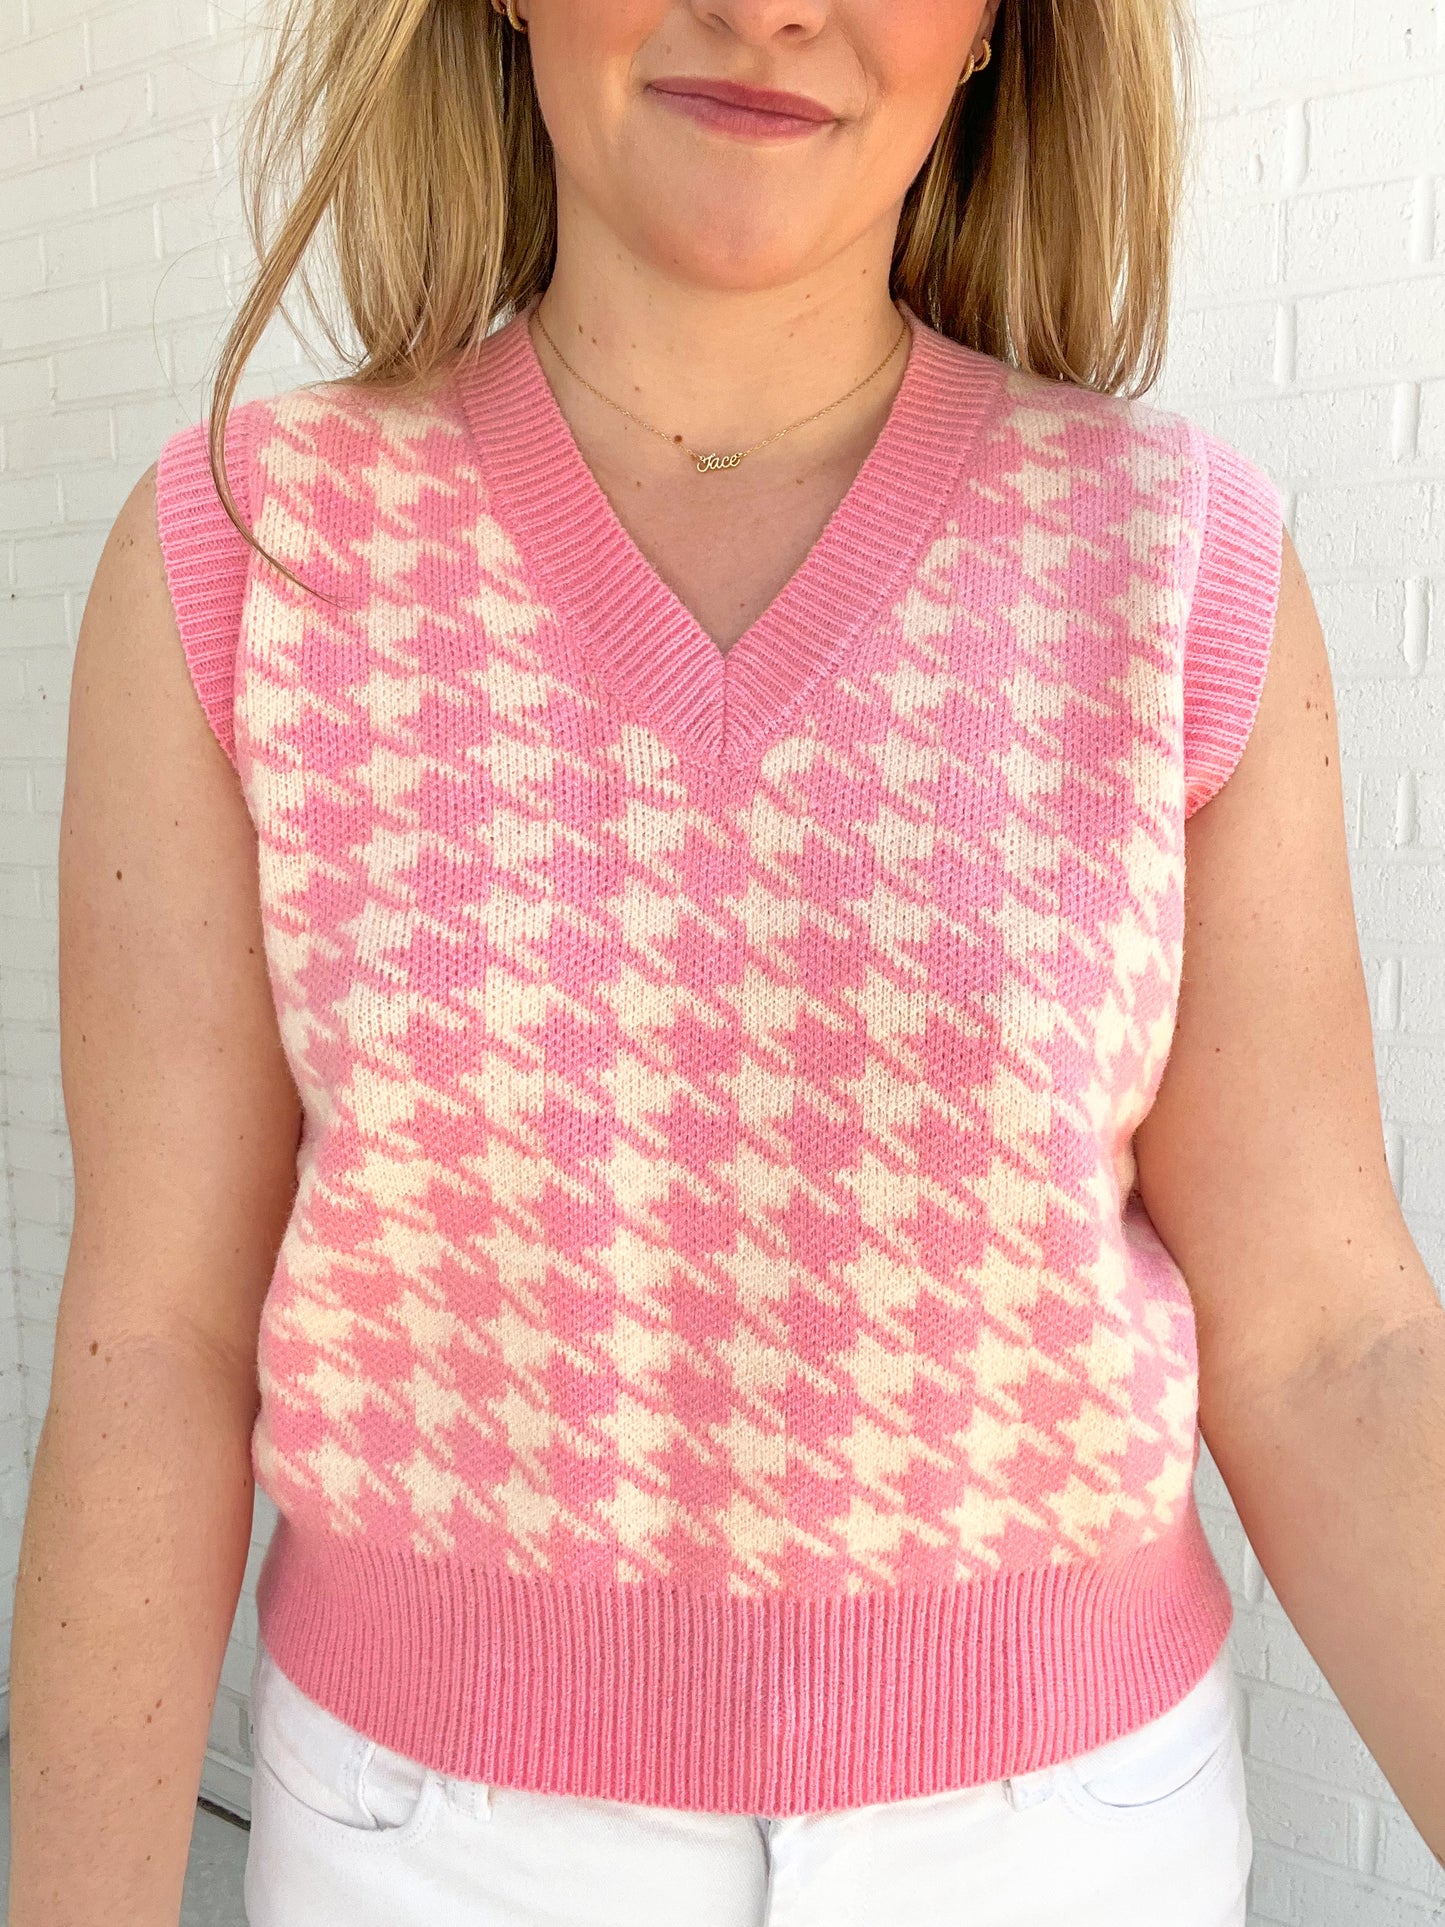 The Hailee Houndstooth Sweater Vest